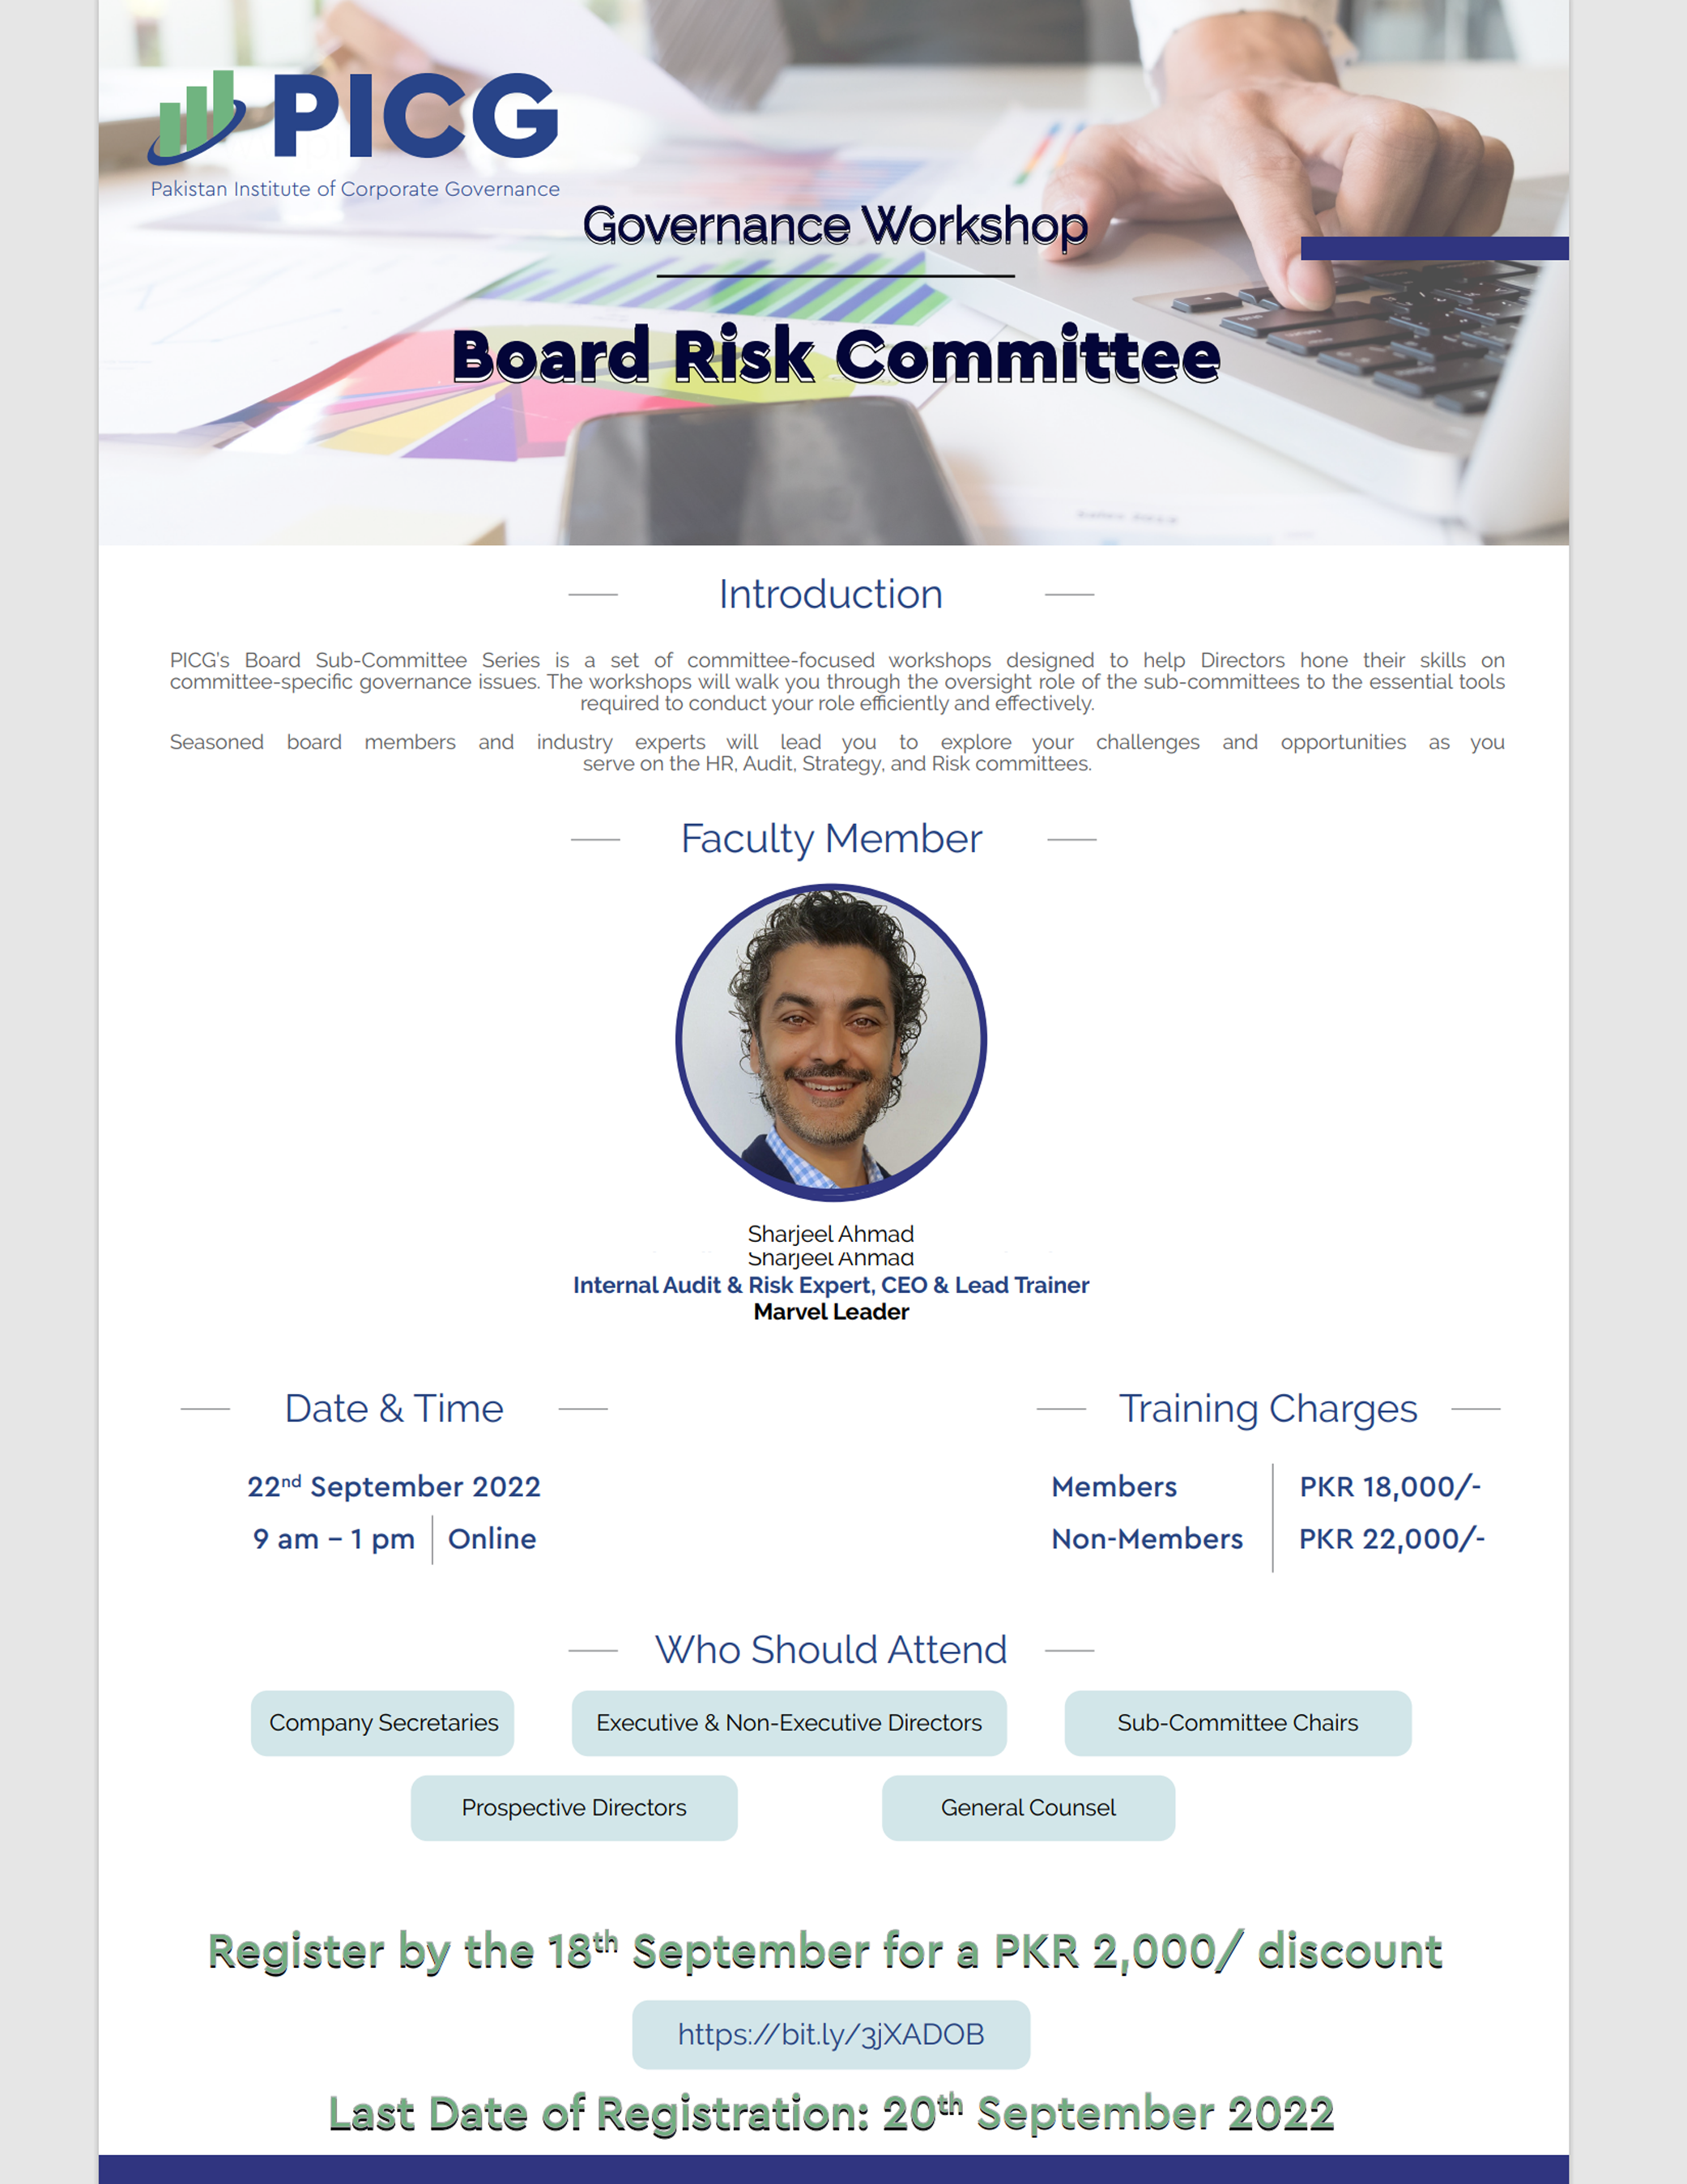 The PICG presents Board Risk Committee